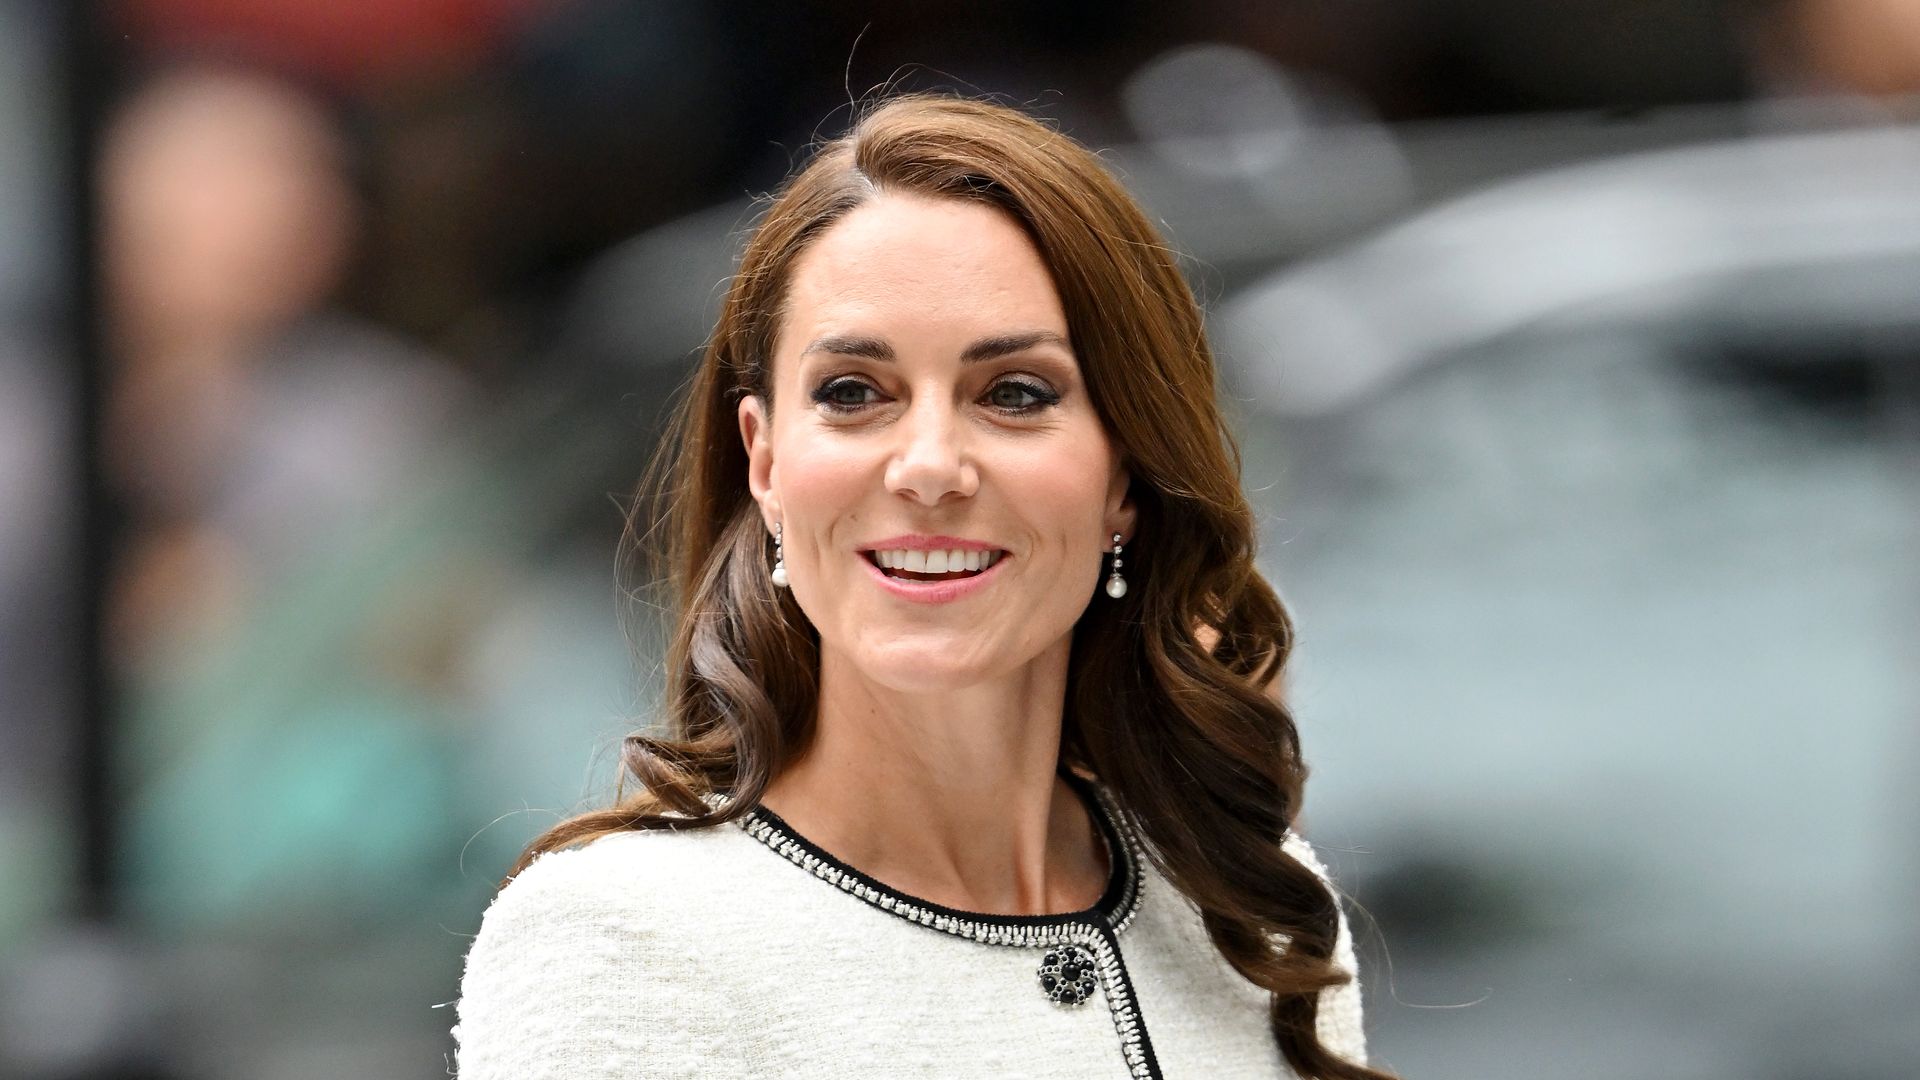 Kate Middleton has a Hollywood moment in ultra-glamorous blazer dress ...